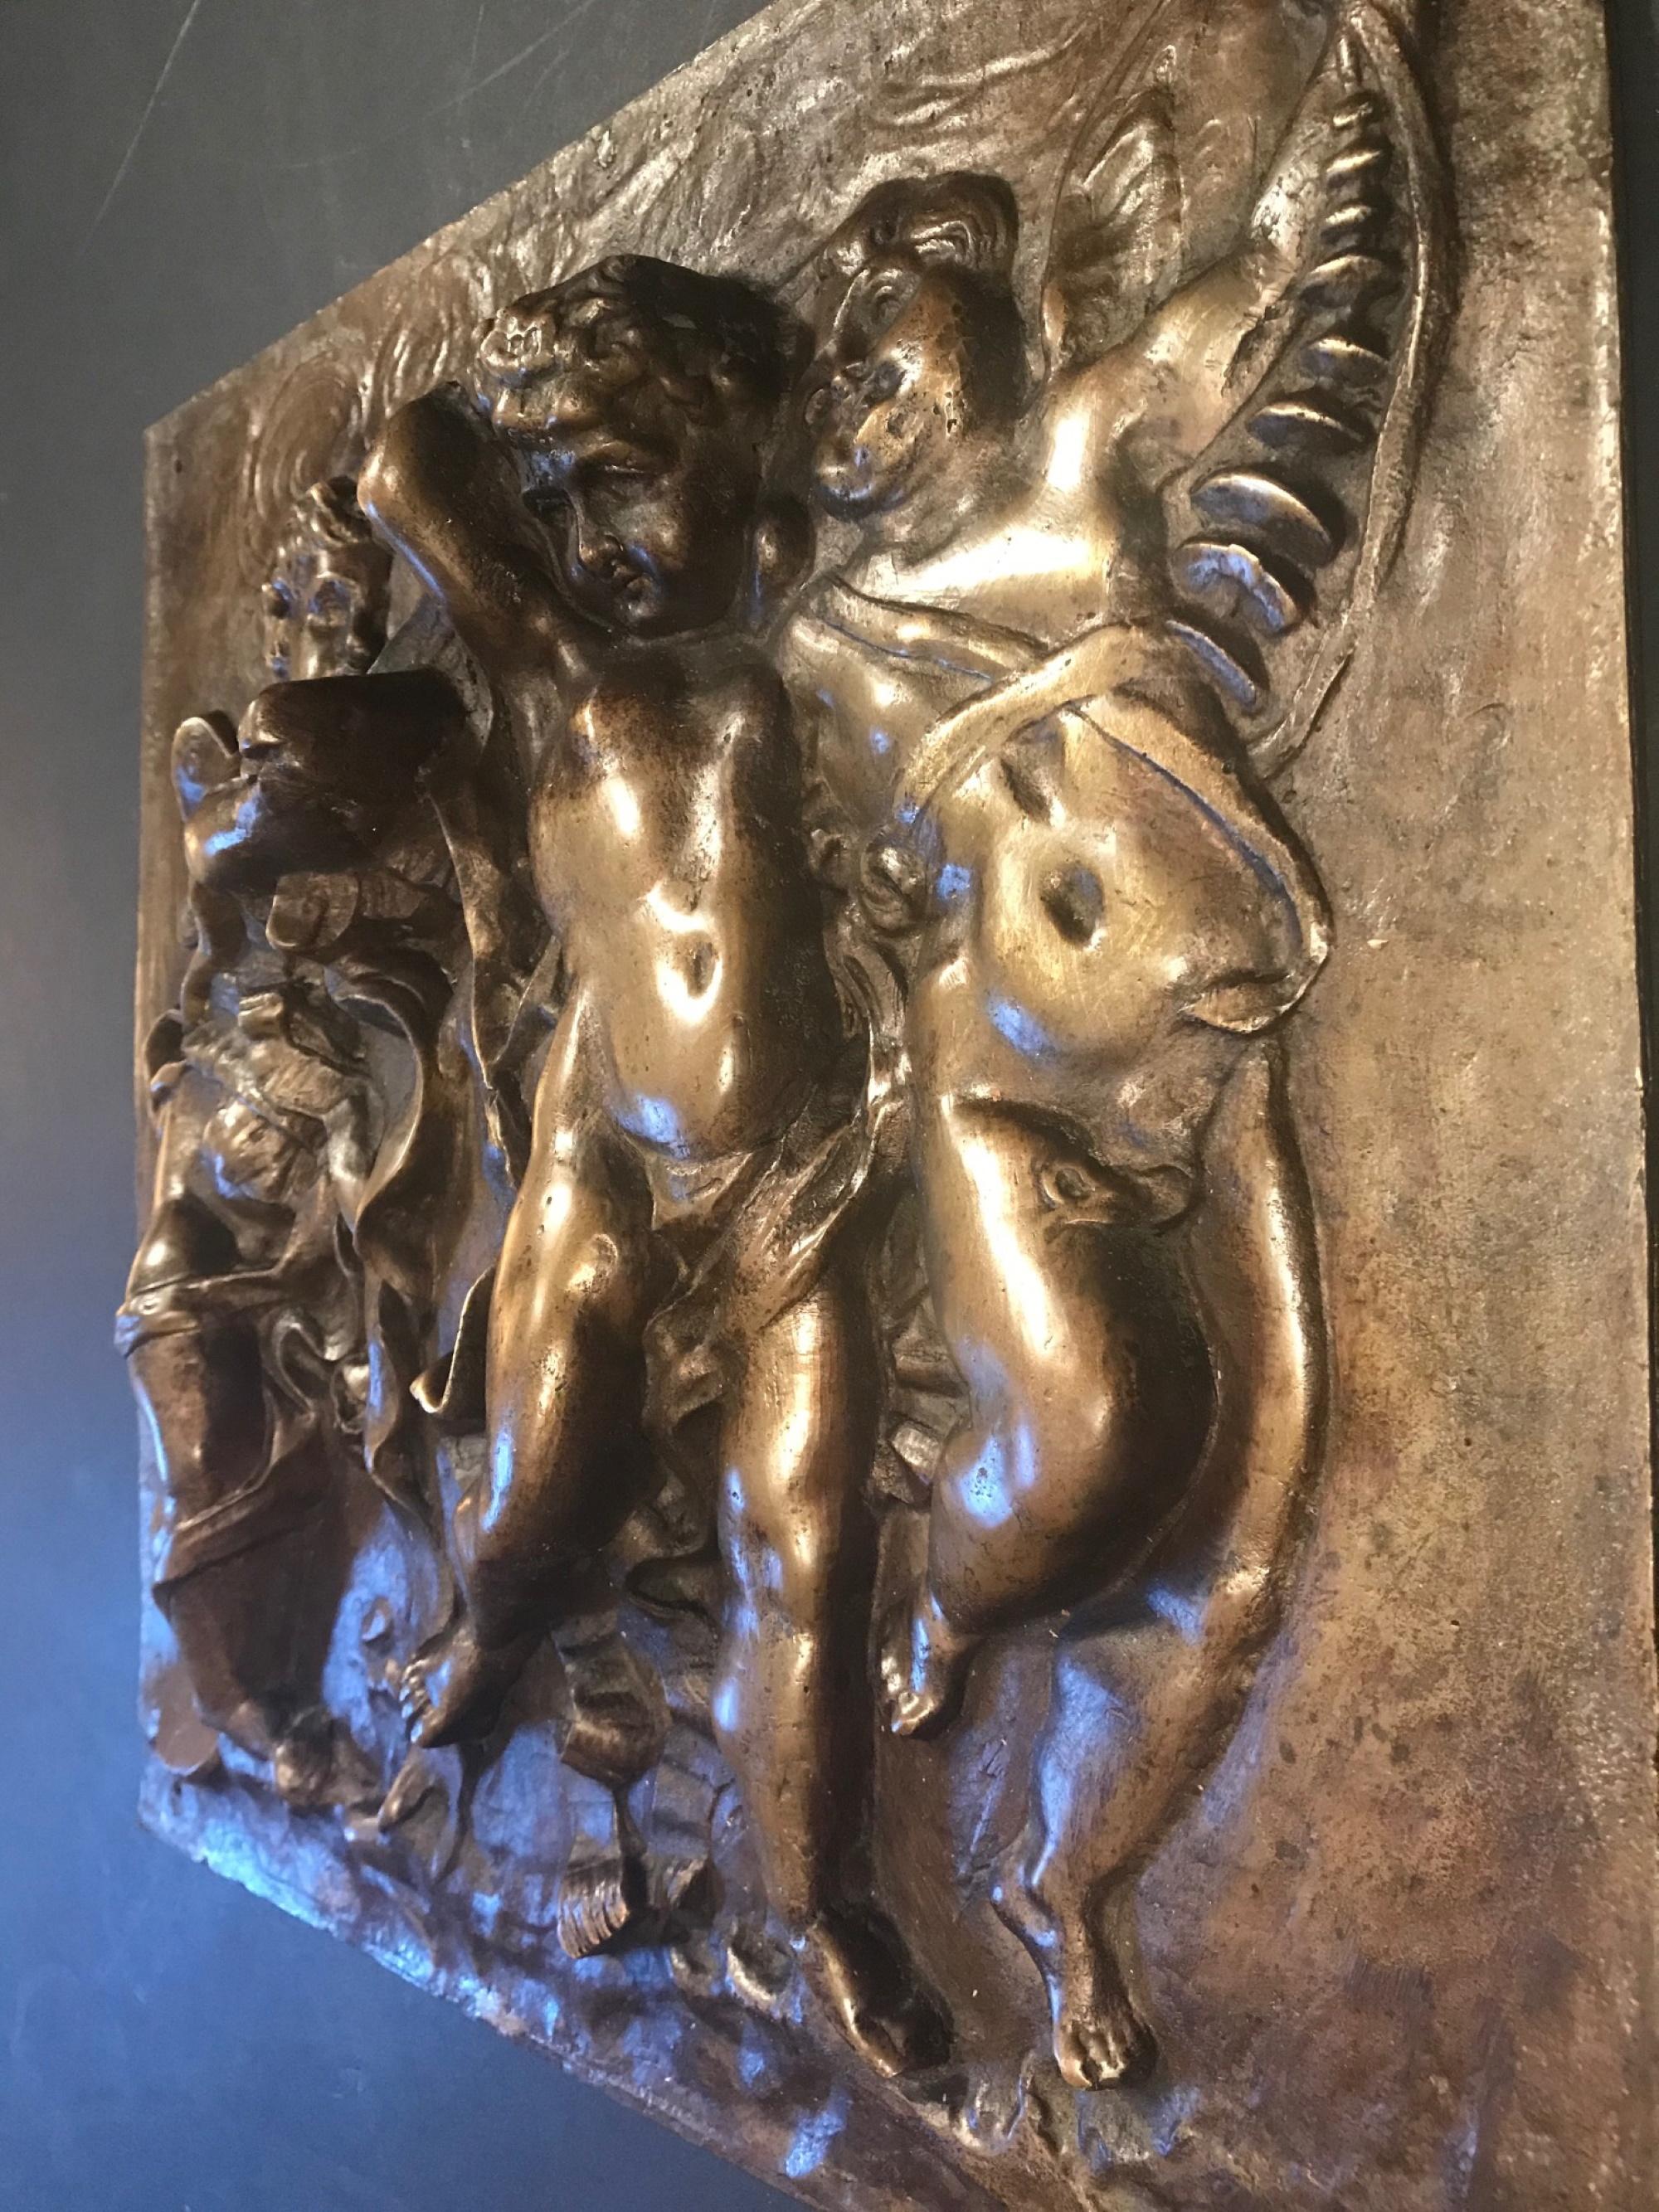 19th century heavy French bronze relief plaque of 3 putti with instruments.

This heavy and beautiful 19th century French bronze plaque features three winged, dancing putti with ribbons and a glockenspiel, an accordion and a tambourine. The